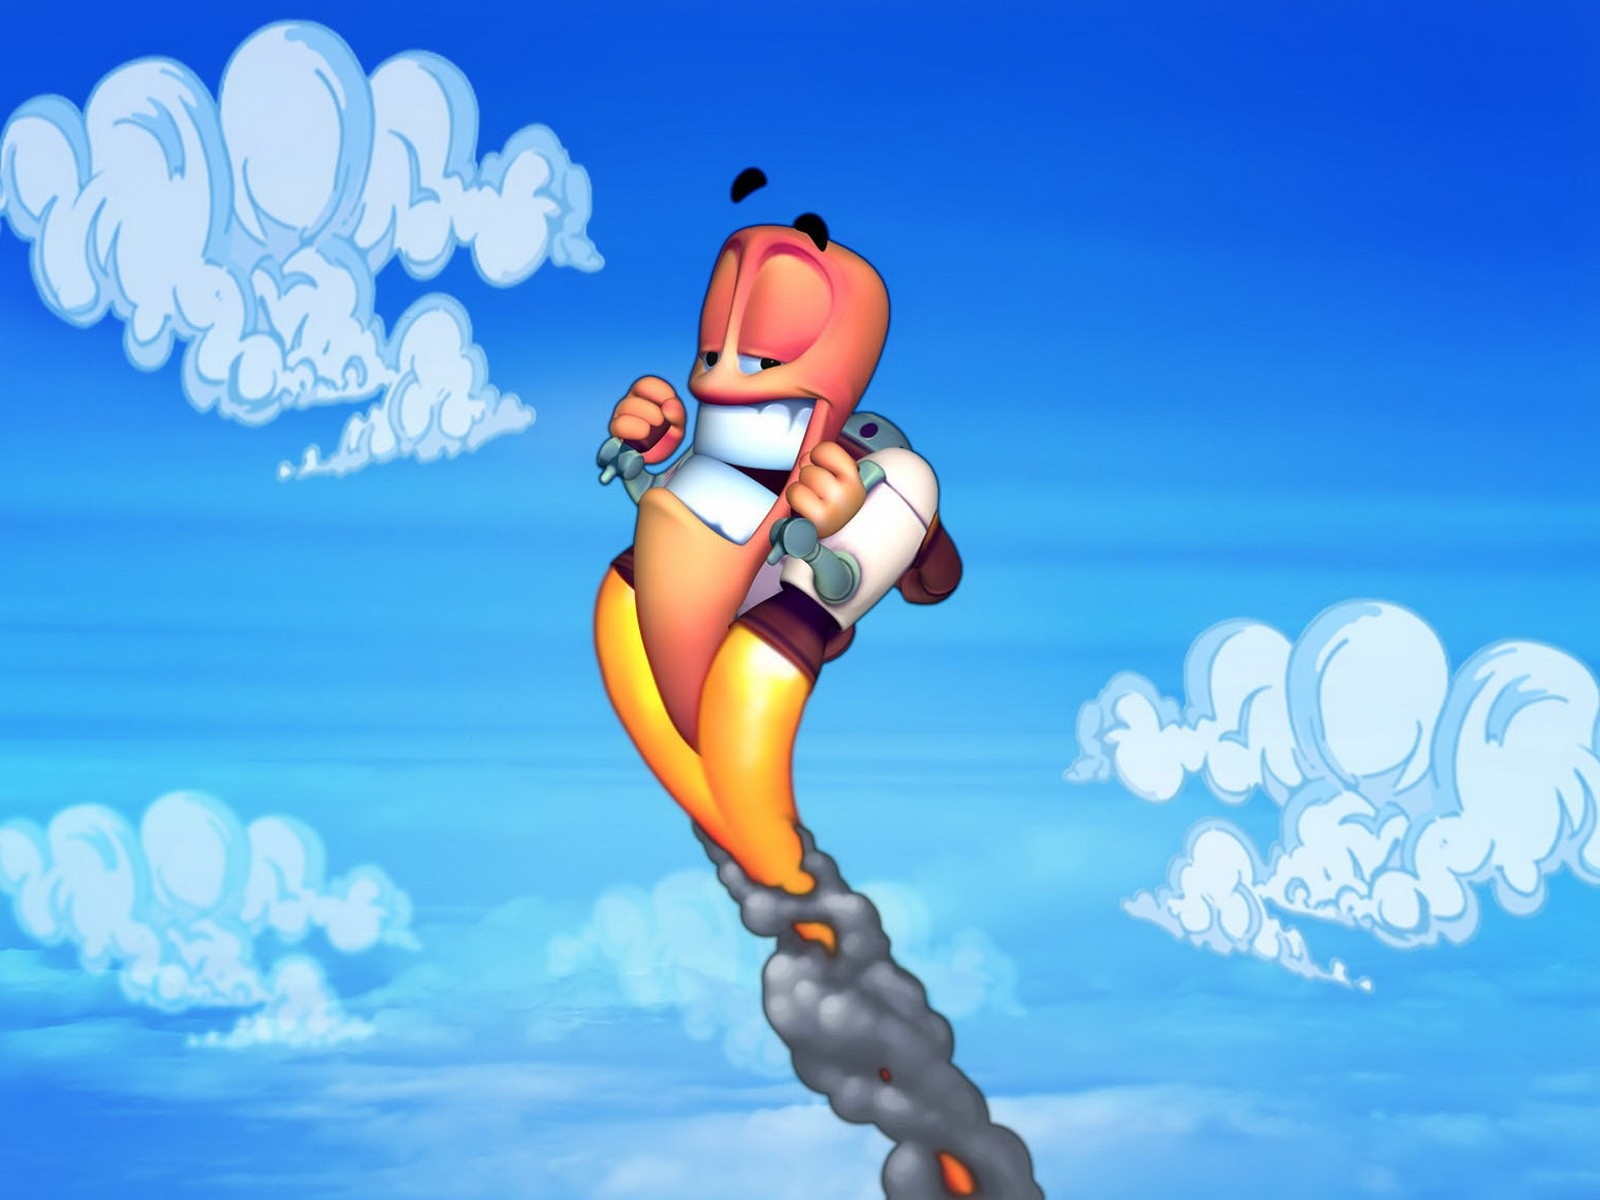 Worms Games Armageddon Wallpaper High Quality